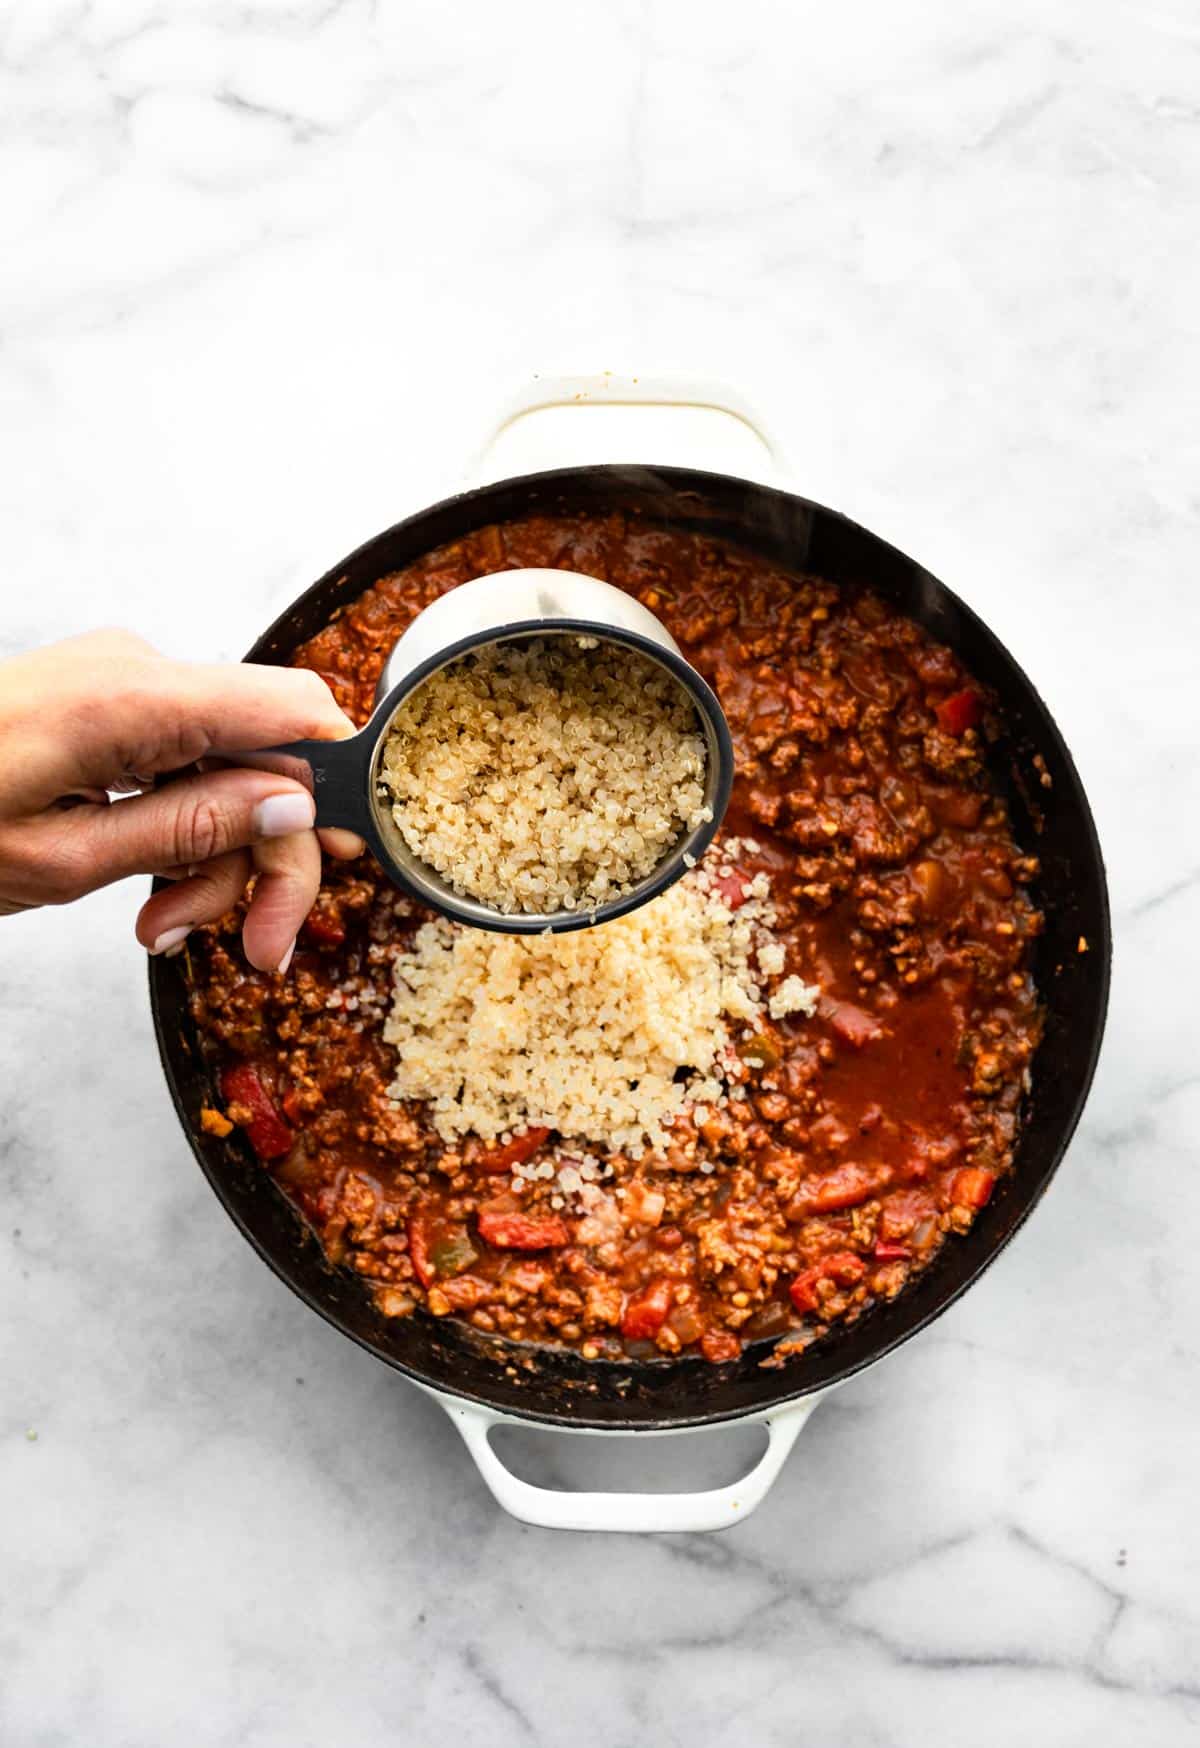 Cooked quinoa being poured into a pan of tomato based ground beef and peppers.